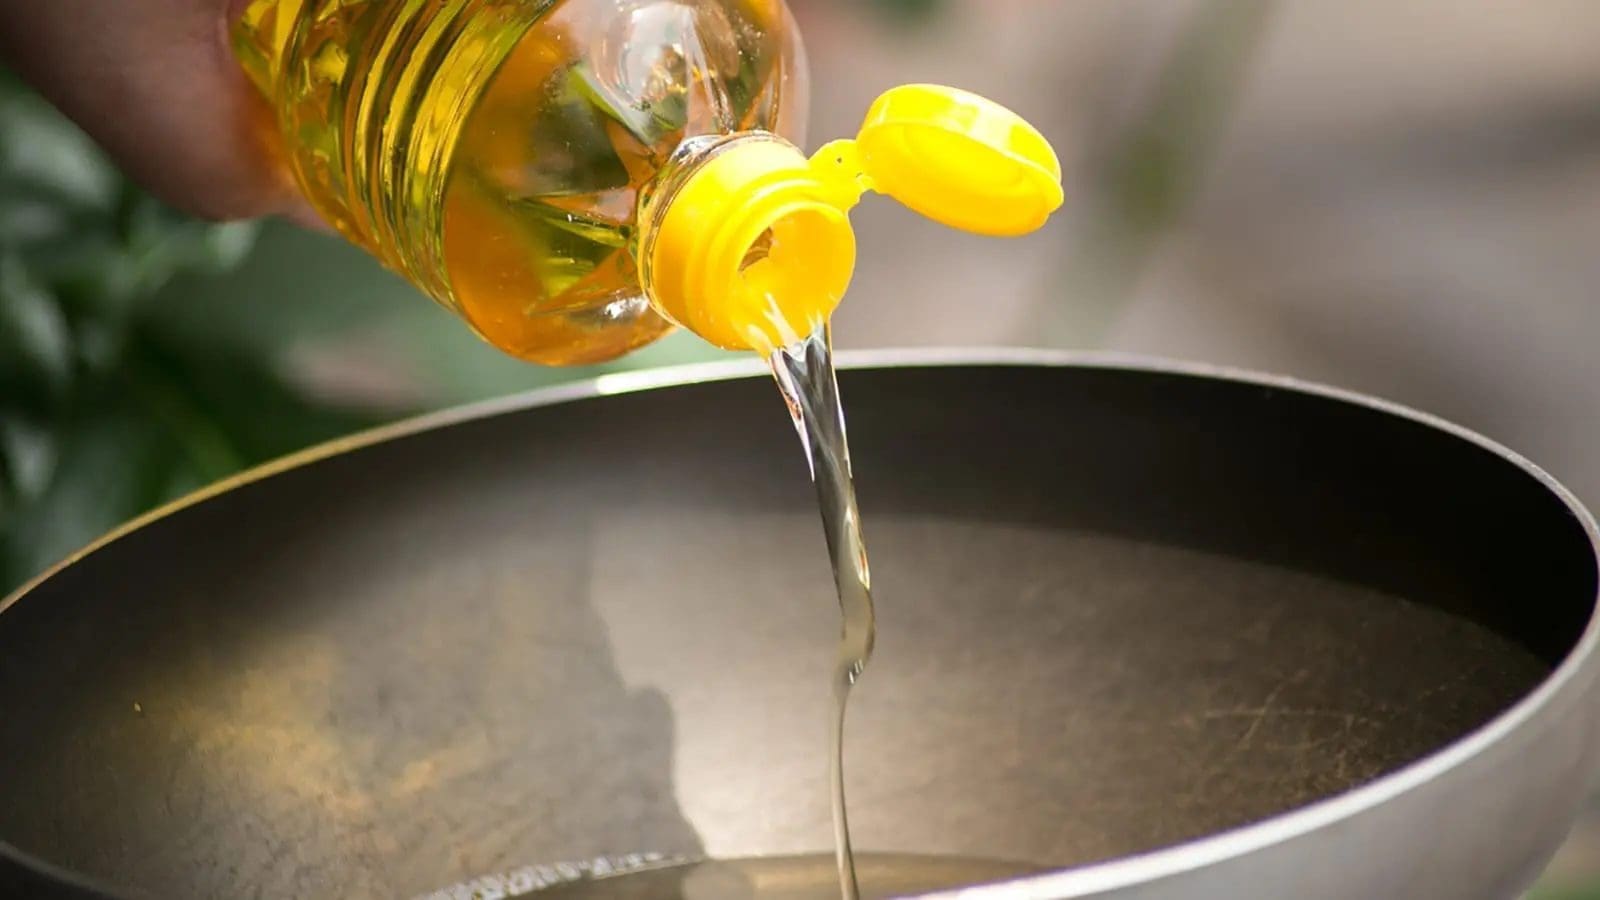 KEBS suspends sale of 10 edible fats, cooking oil brands in Kenya over non-compliance